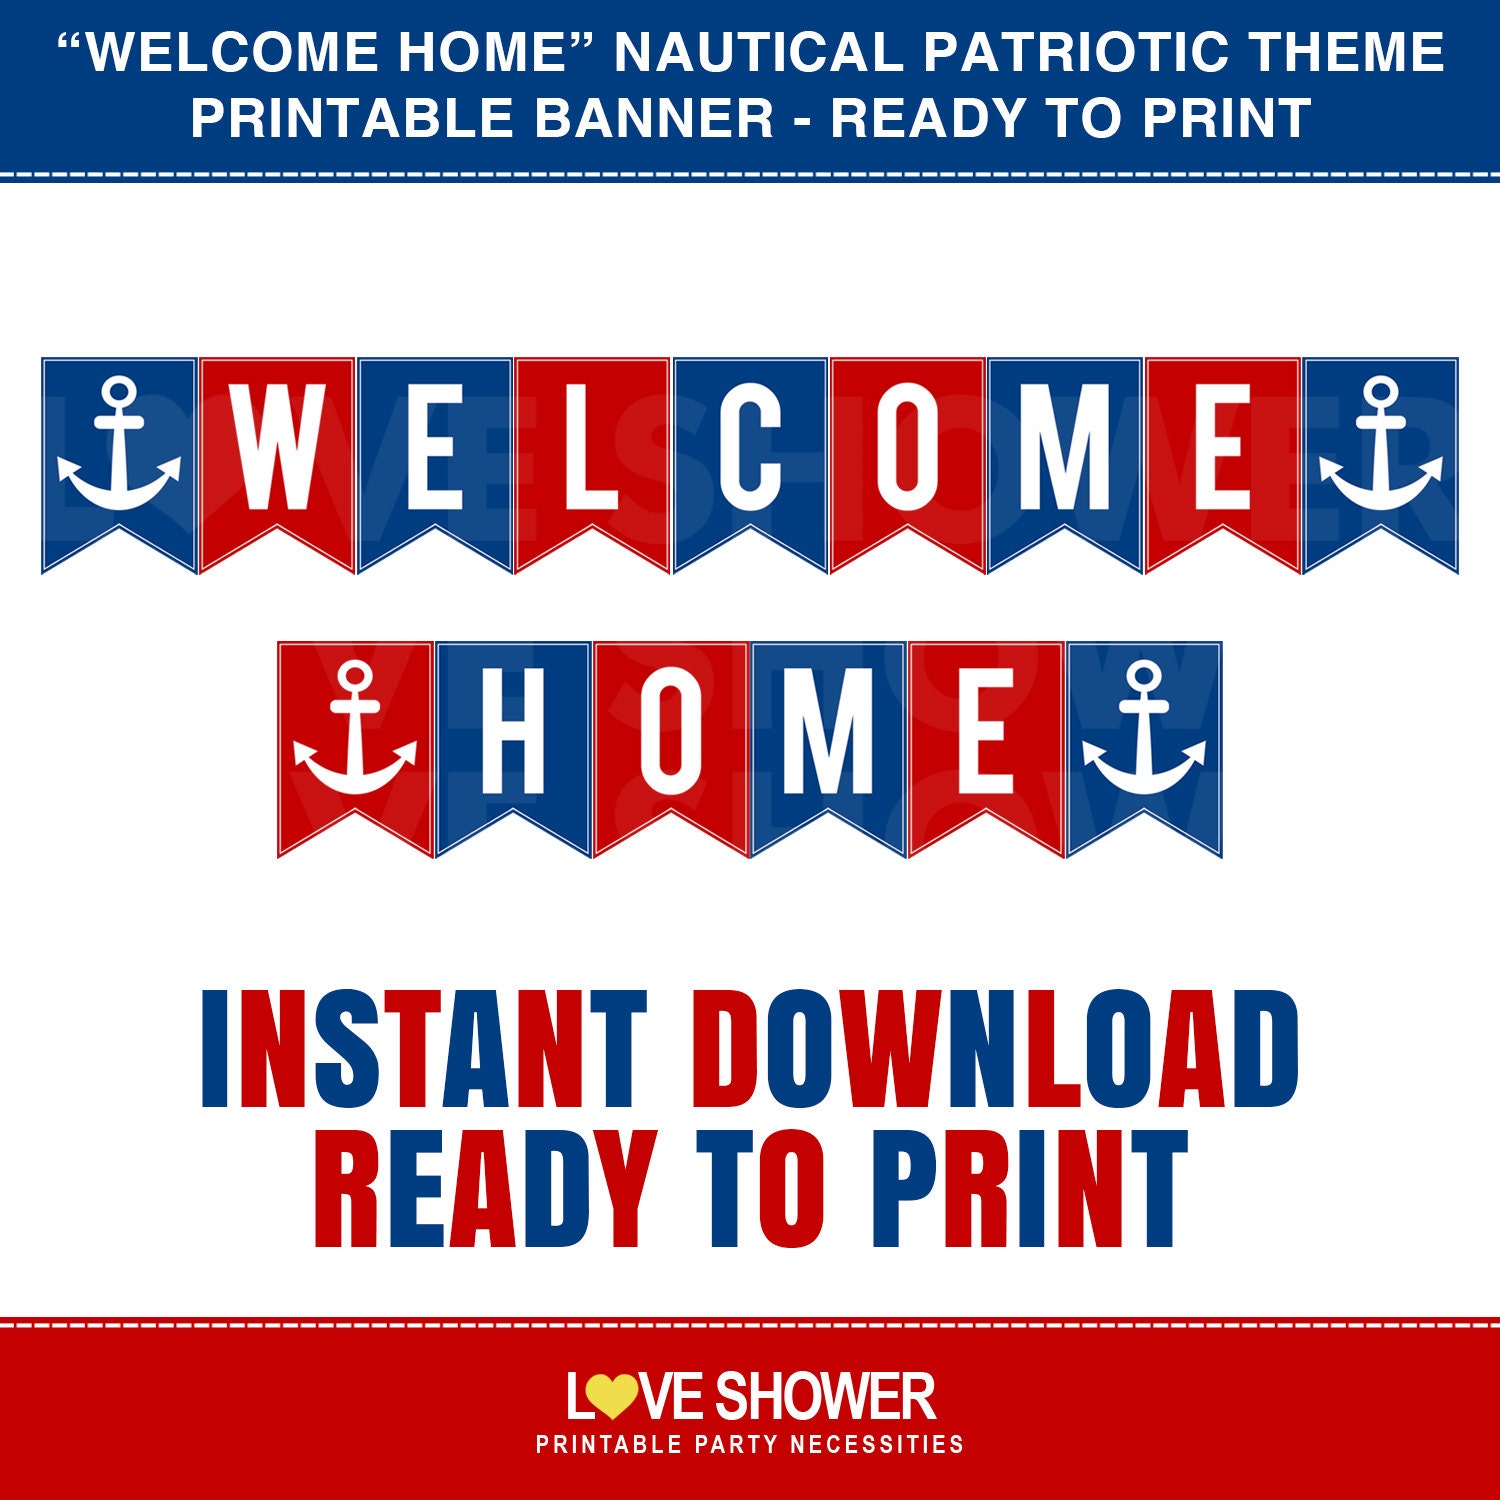 welcome-home-printable-banner-red-blue-nautical-patriotic